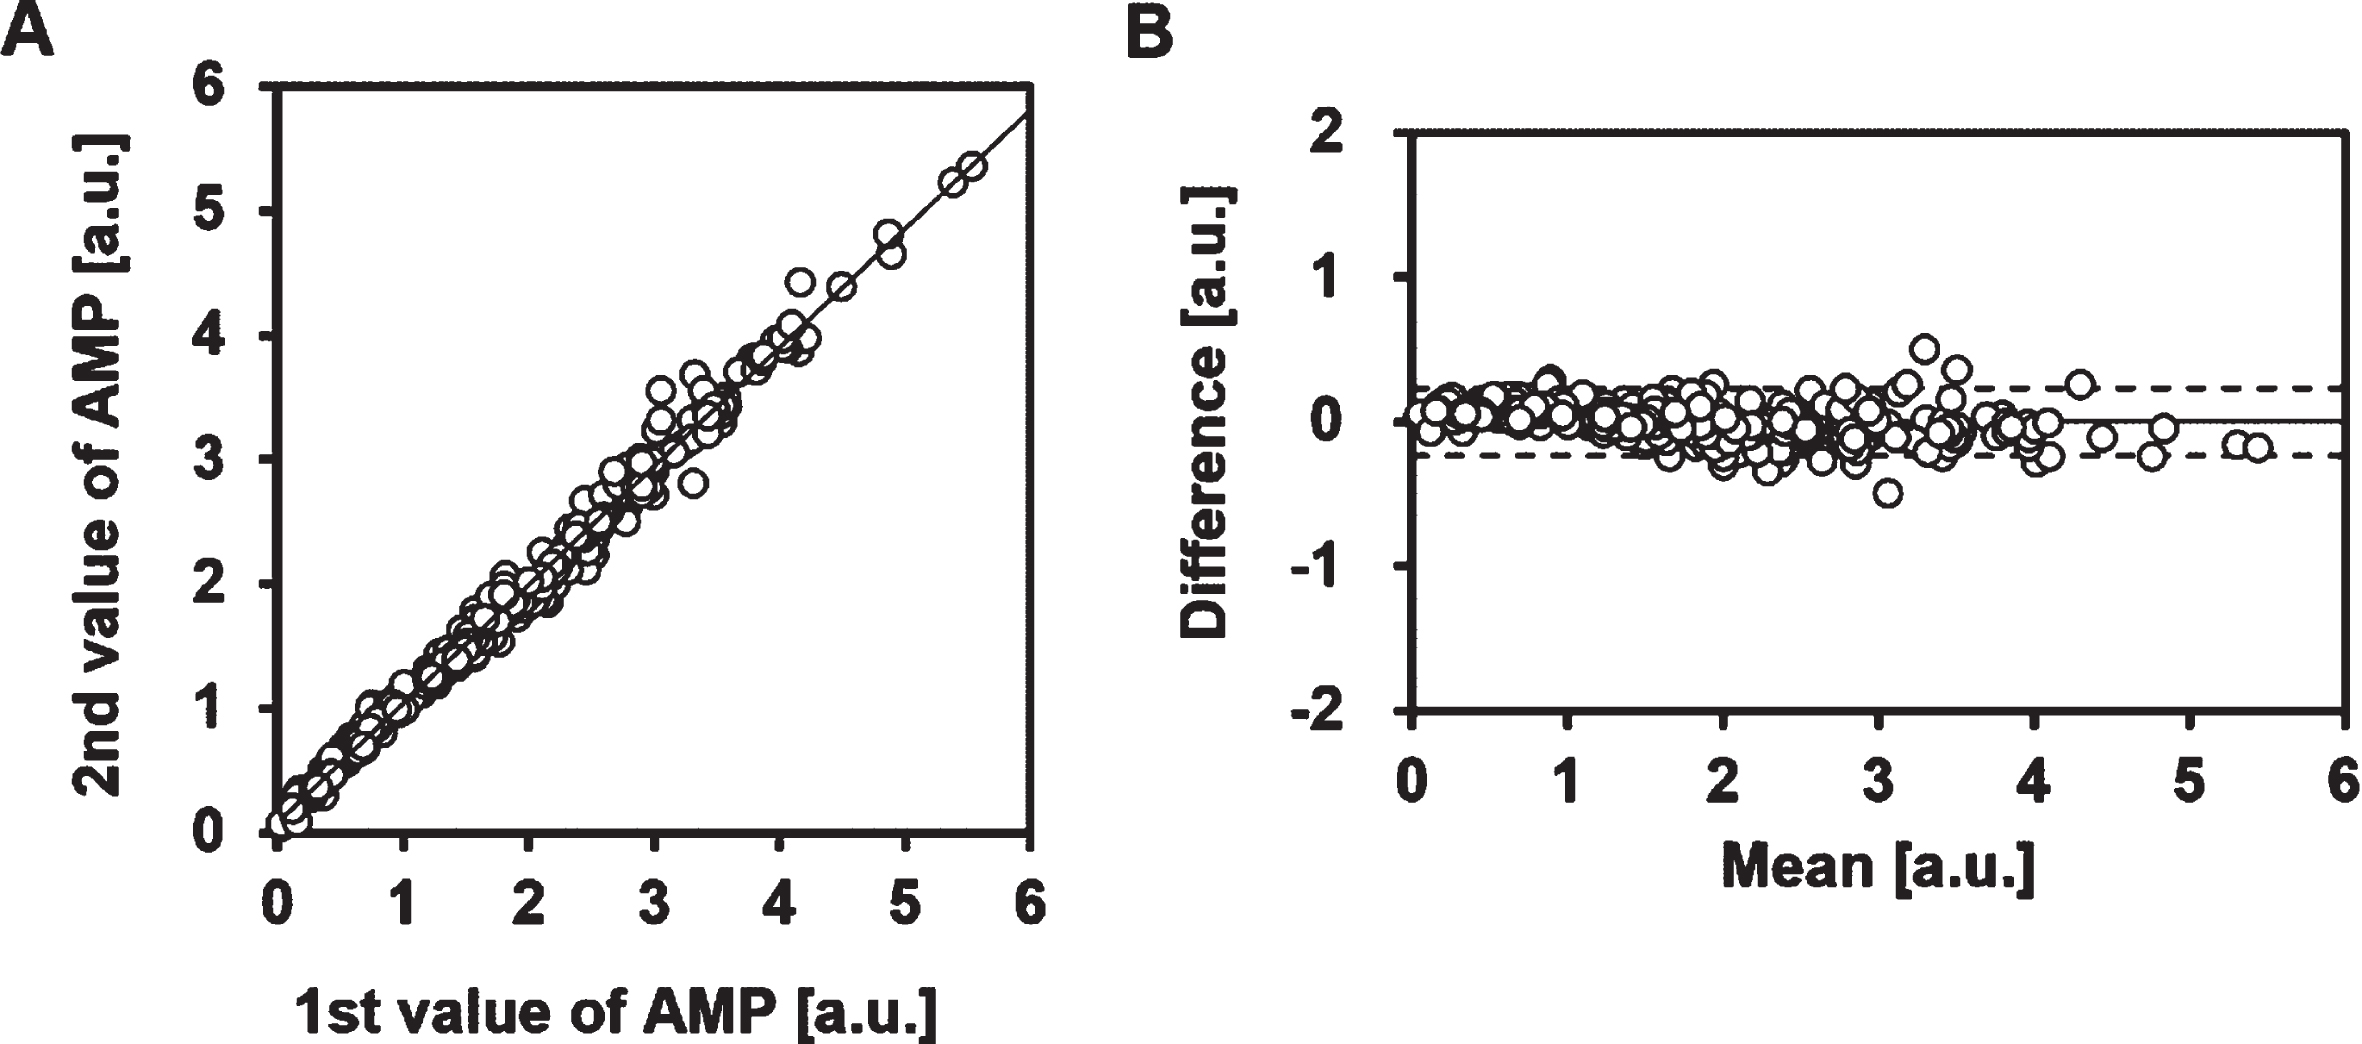 Reproducibility of the AMP value. (A) Relationship between the first and second measurements for AMP. Correlation coefficient for AMP, r = 0.995 (p < 0.01, n = 320). The solid line represents the regression line. The first measurement was performed 1 min after mixing, and the second measurement was performed 3 min after mixing. (B) Bland-Altman plot for the first and second measurements of AMP. The solid line represents the bias. The dotted line indicates 1.96 SD.